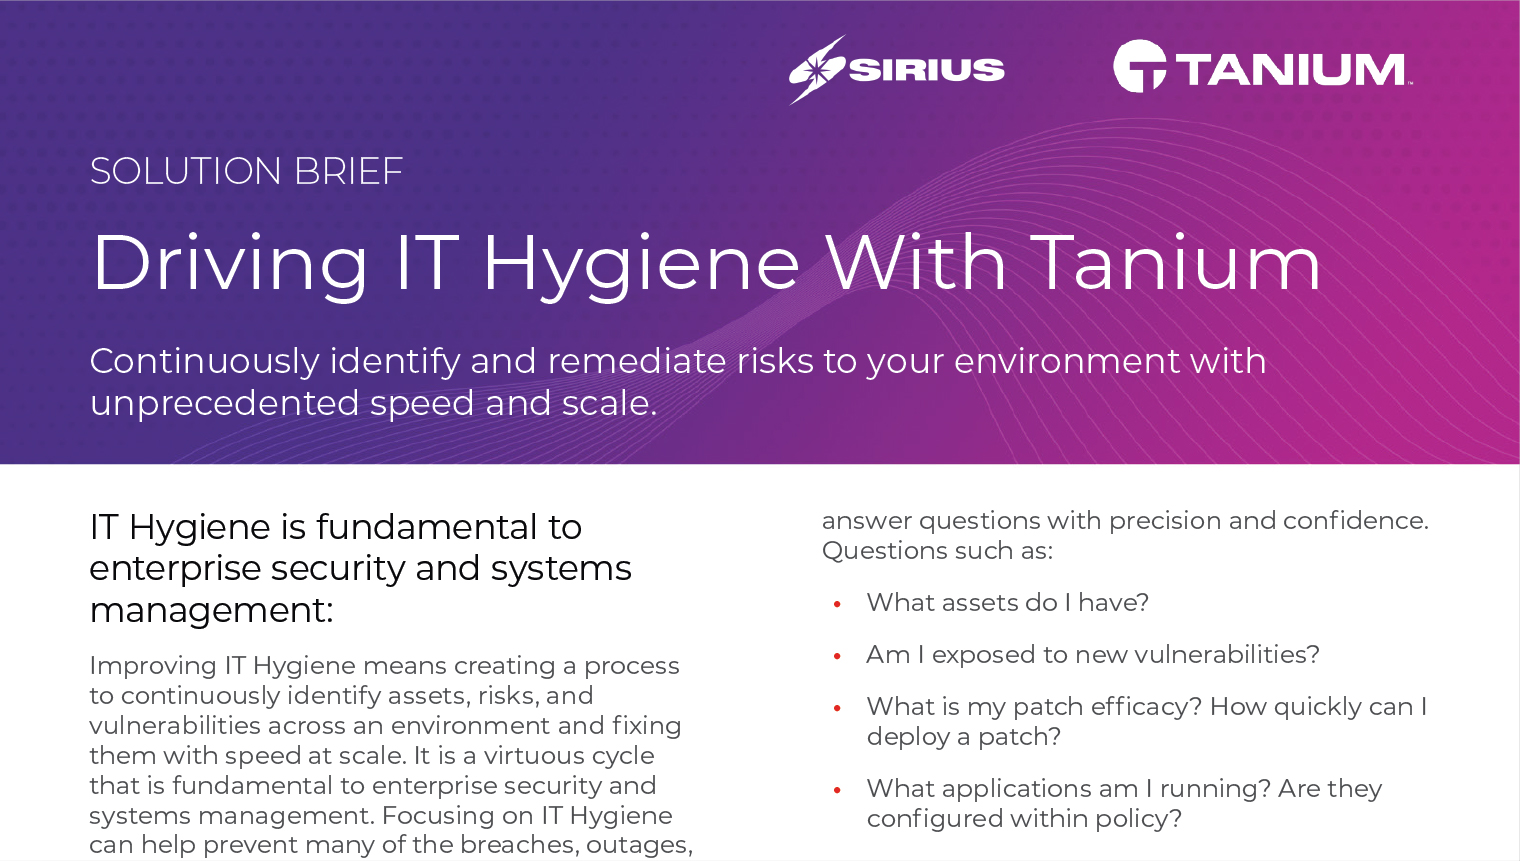 Solution Brief: Driving IT Hygiene With Tanium